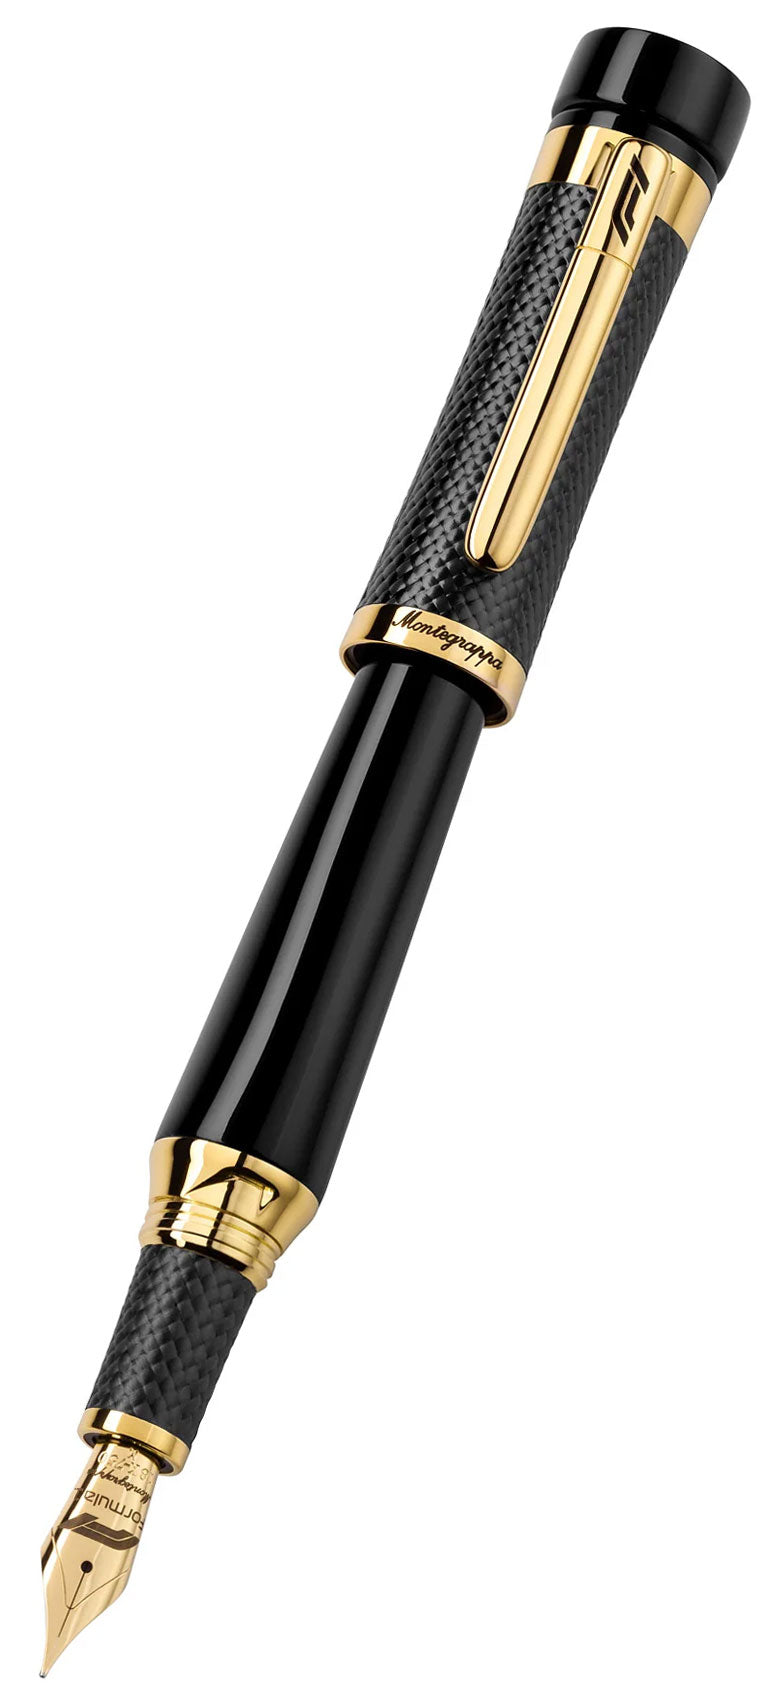 update alt-text with template Pens - Fountain - Other-Montegrappa-ISS1L2BC-accessories, black, F1 Speed, fountain, gold-tone, Montegrappa, new arrivals, pens, rpSKU_ISS1L1BC, rpSKU_ISS1L8BC, rpSKU_ISZ4F1IY_Q, rpSKU_ISZ4F2IY_Q, rpSKU_ISZ4F3IY_Q-Watches & Beyond